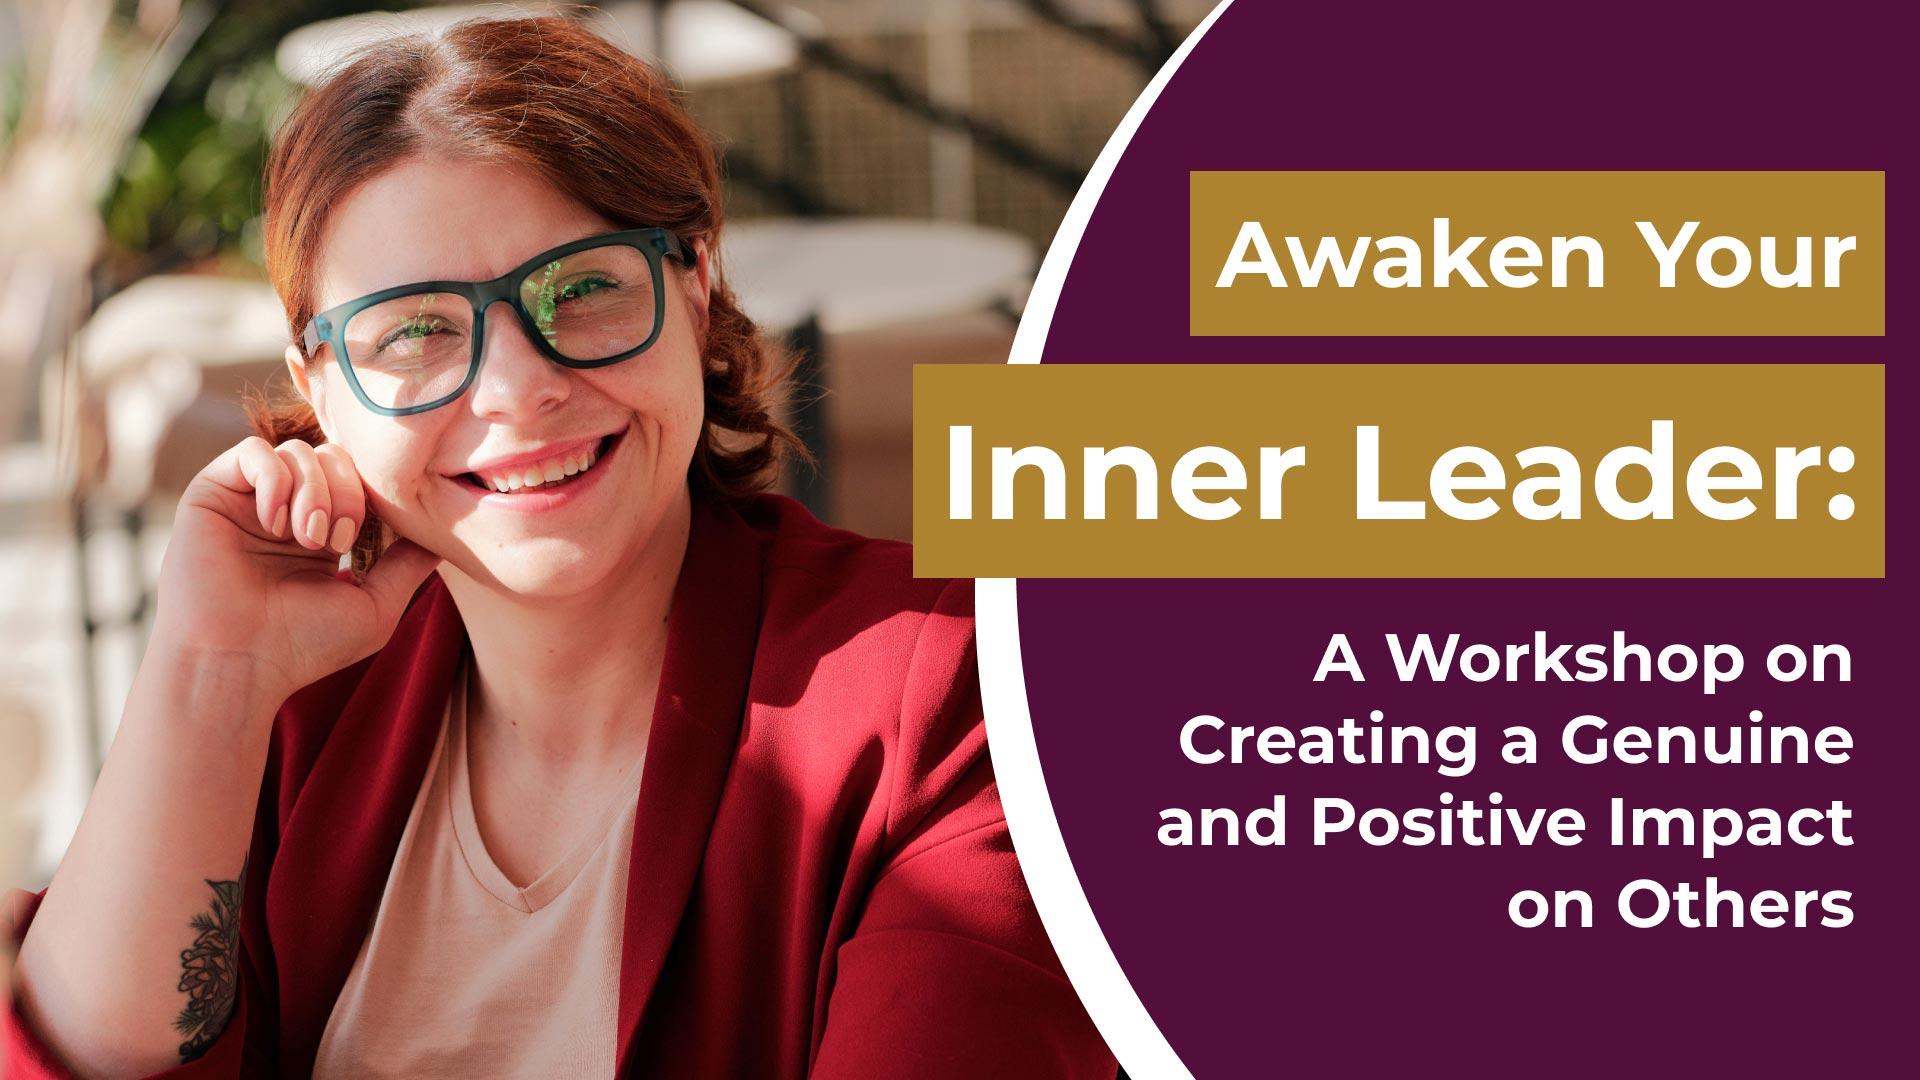 Awaken Your Inner Leader: A Workshop on Creating a Genuine and Positive Impact on Others